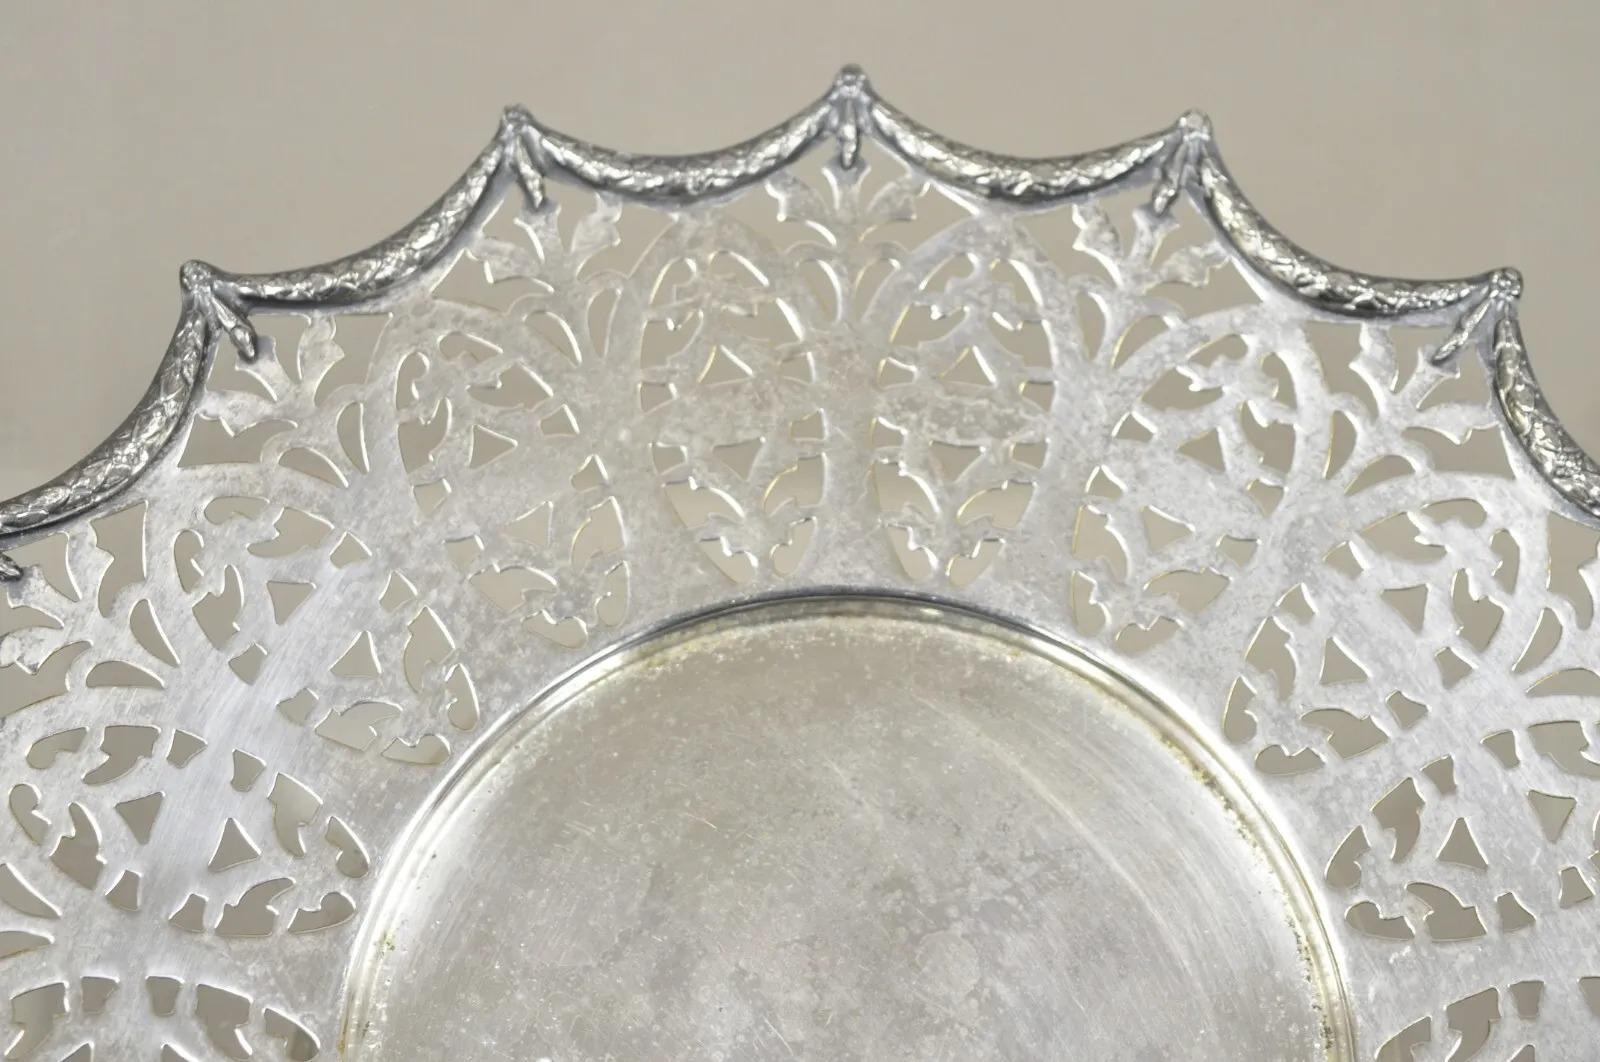 20th Century Victorian Silver Plated Draped Rim Small Footed Trinket Dish Platter Tray For Sale